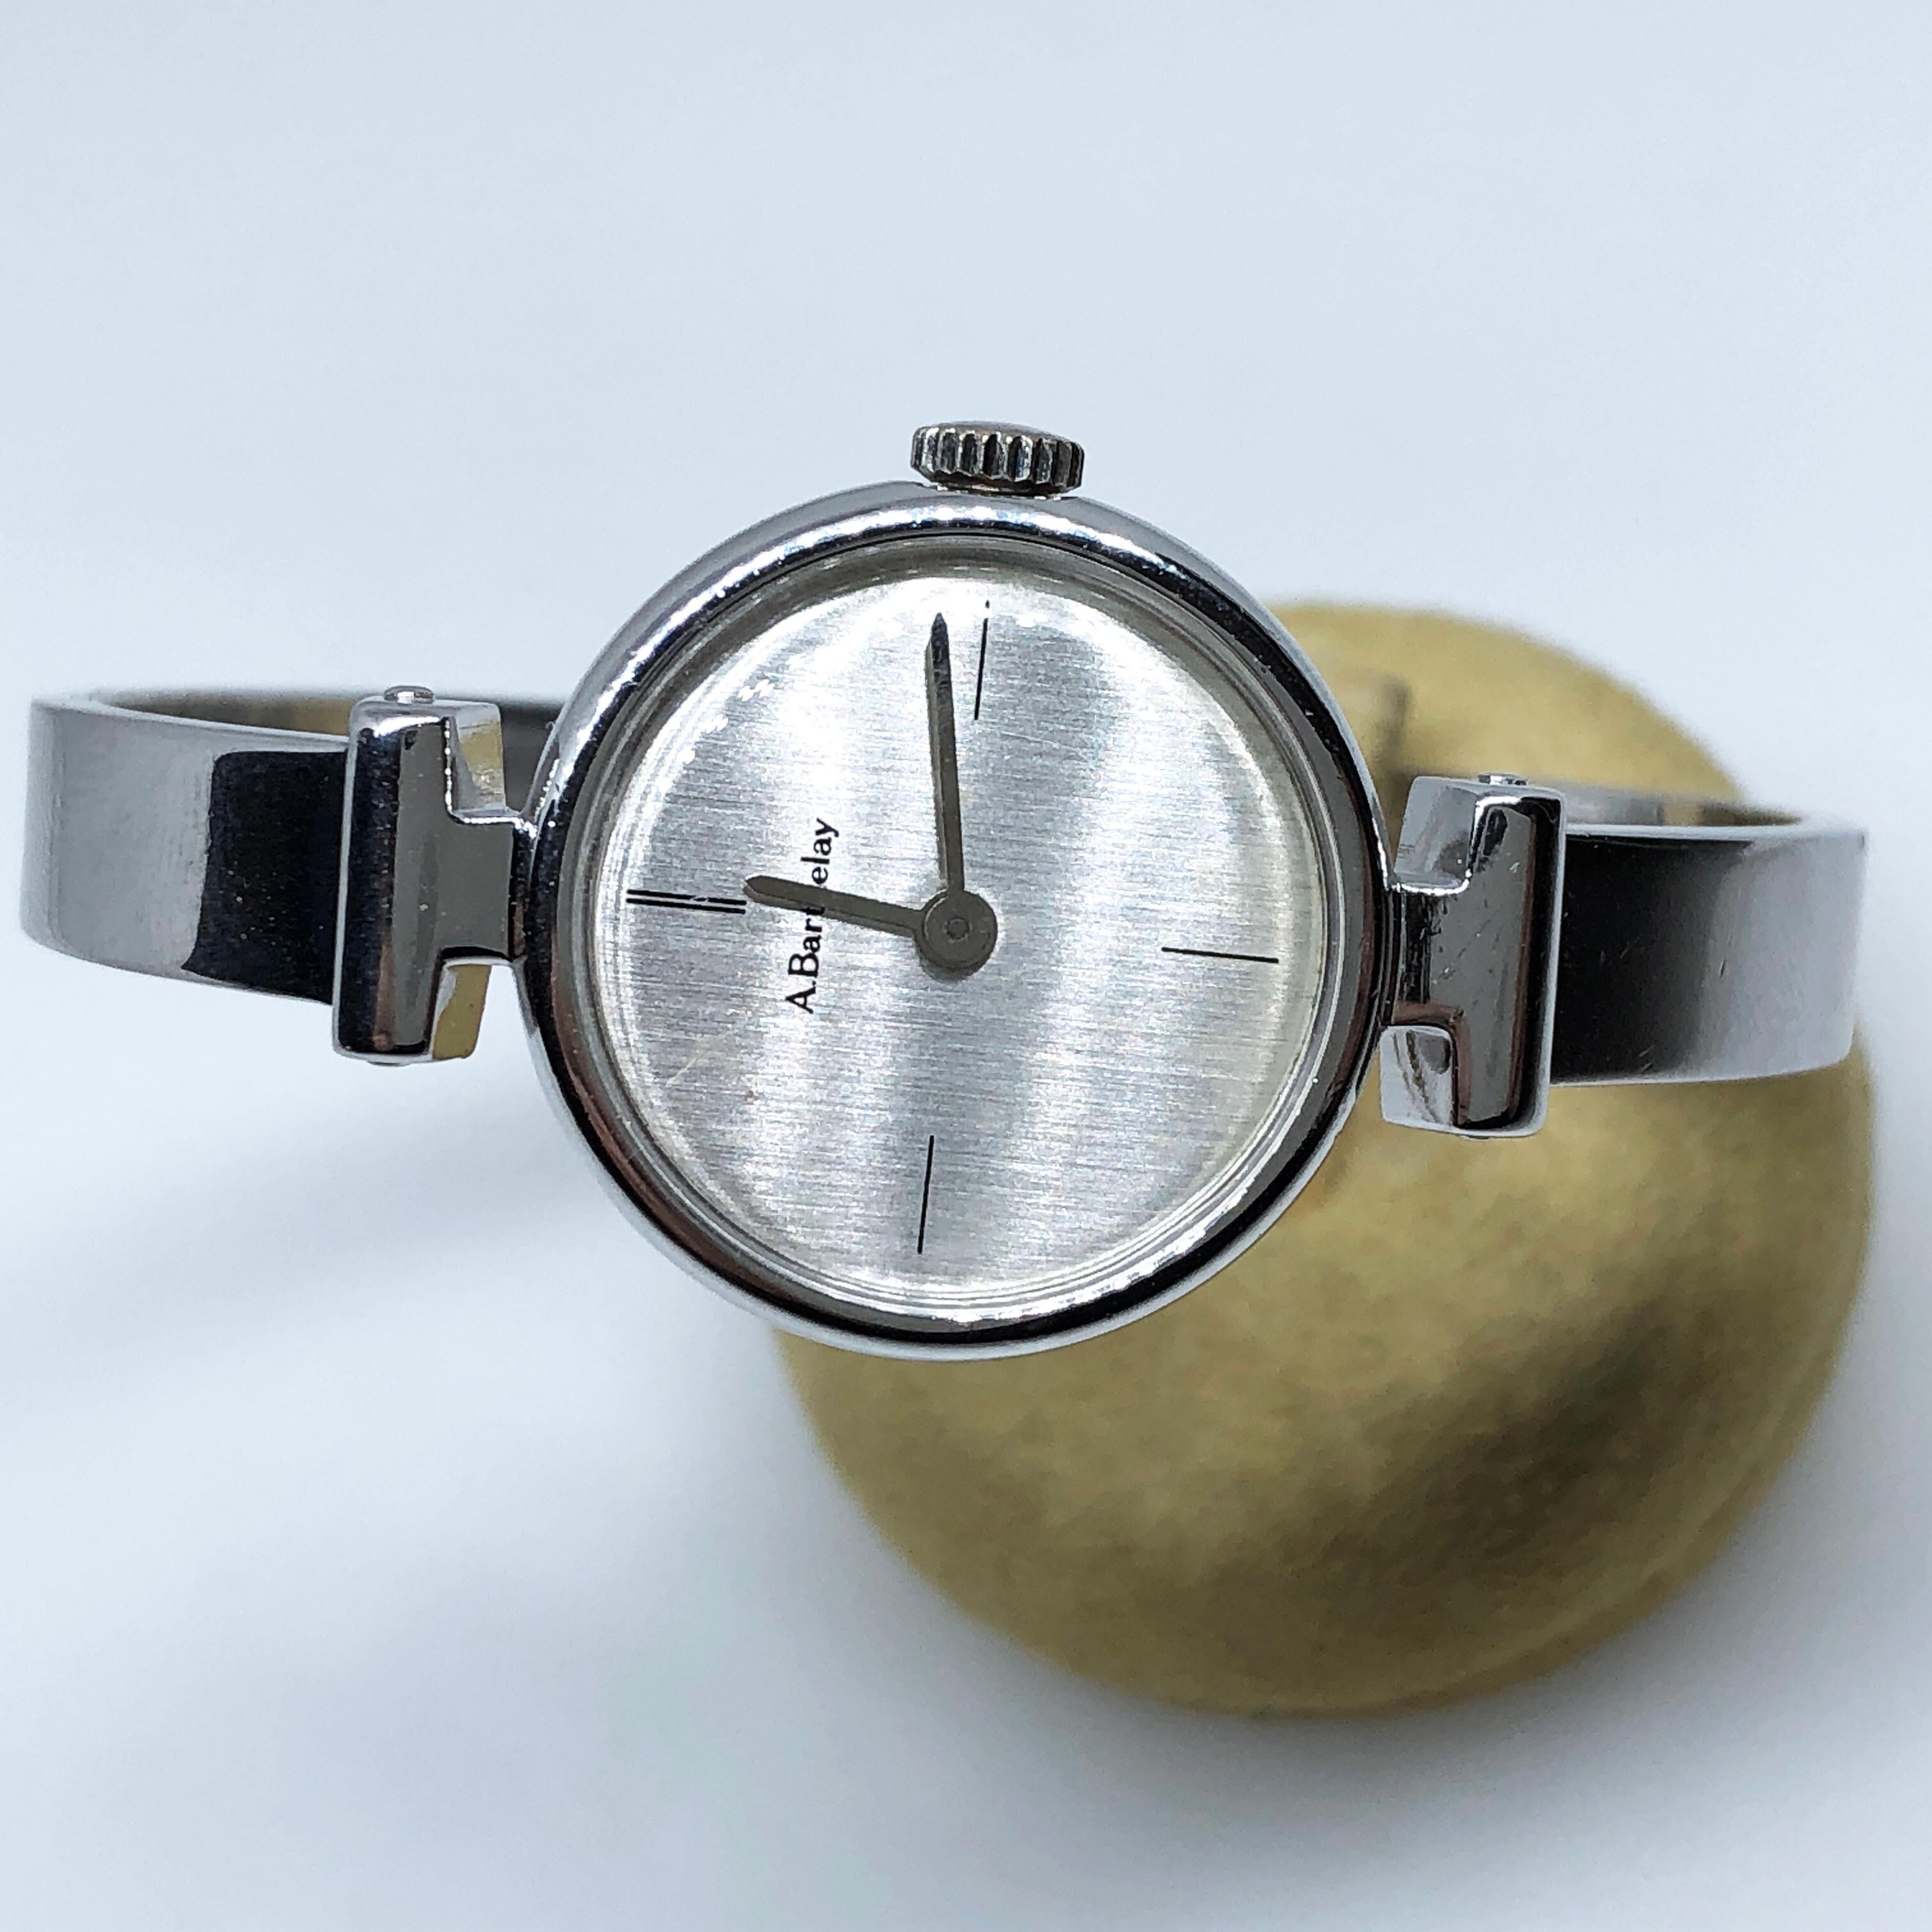 Original 1974 Alexis Barthelay Hand-Wound Movement Sterling Silver Watch For Sale 3